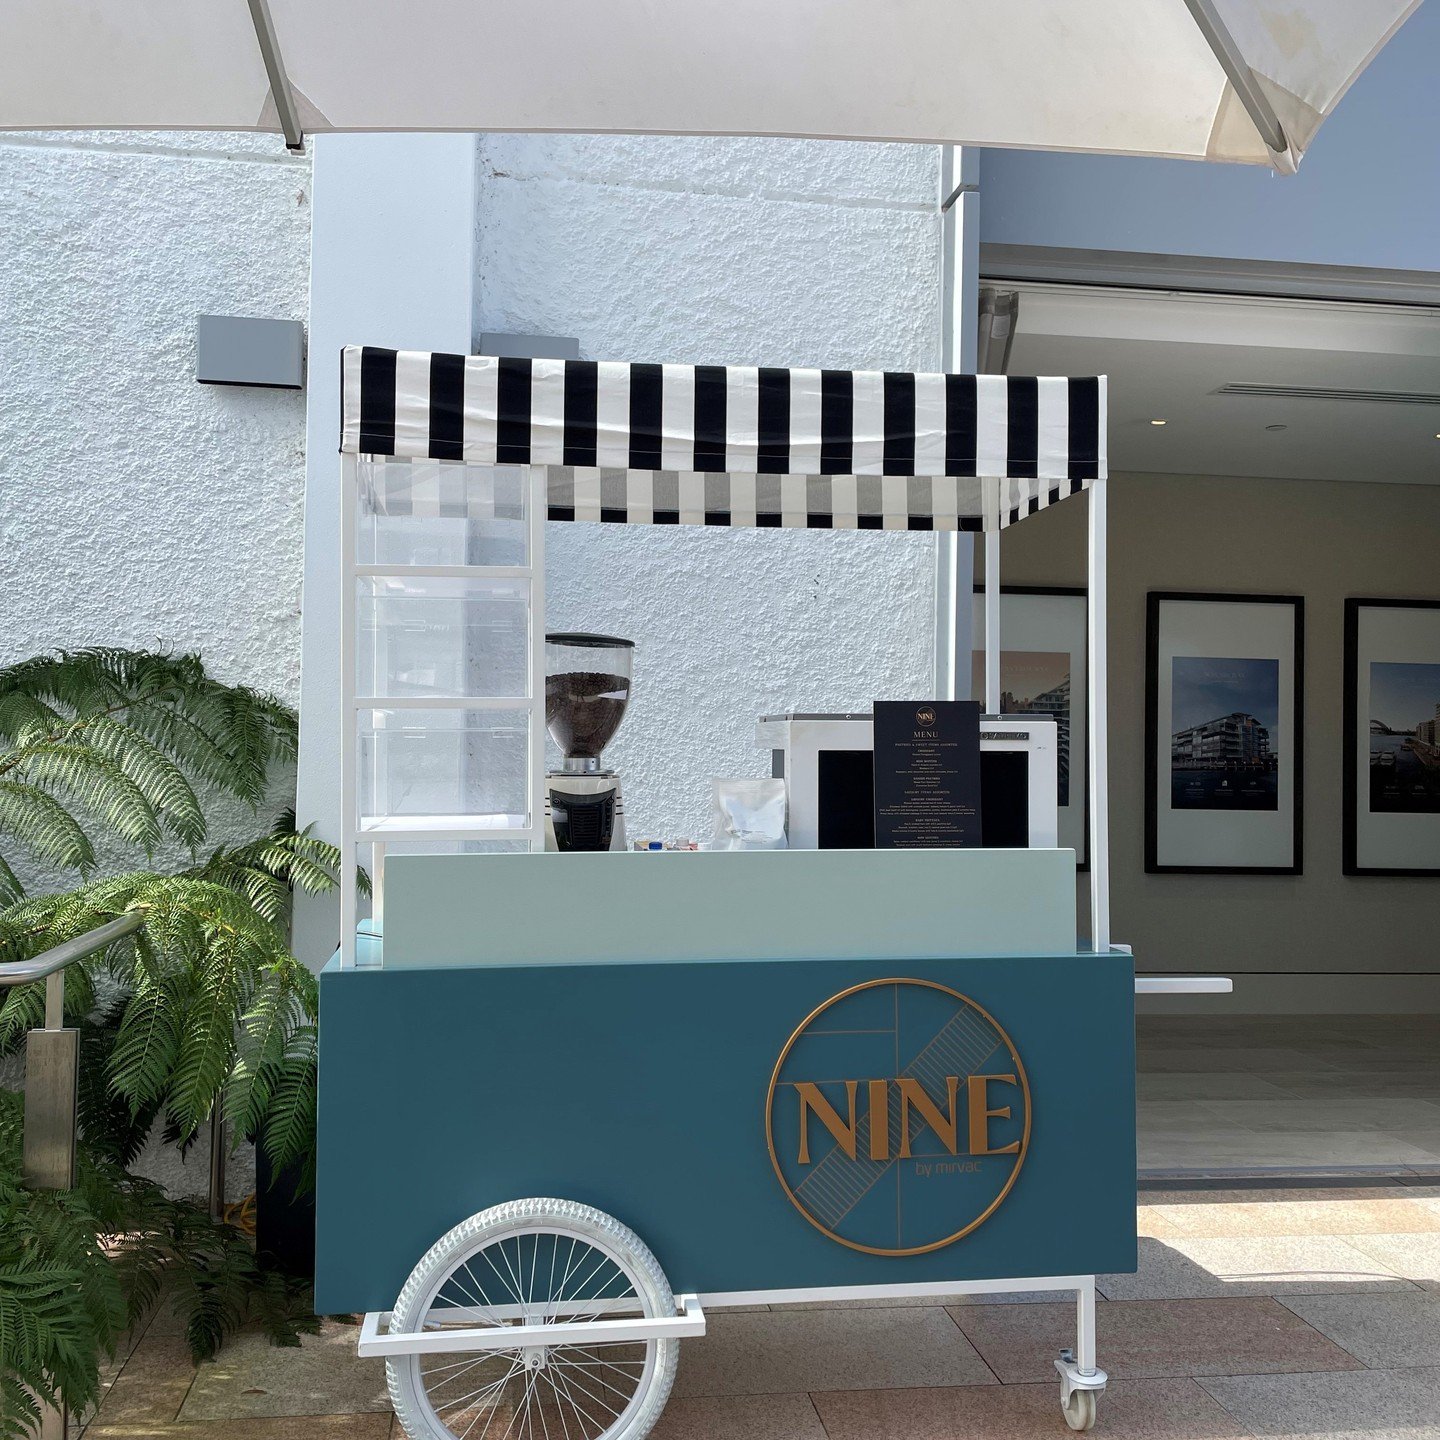 BRAND EXPERIENCES - COFFEE CART &amp; BARISTAS
A staple on the Brand Experience checklist, select from a wide range of coffee carts and custom branding options to create the perfect fit for your brand. Serving superior blends of coffee with beans sel